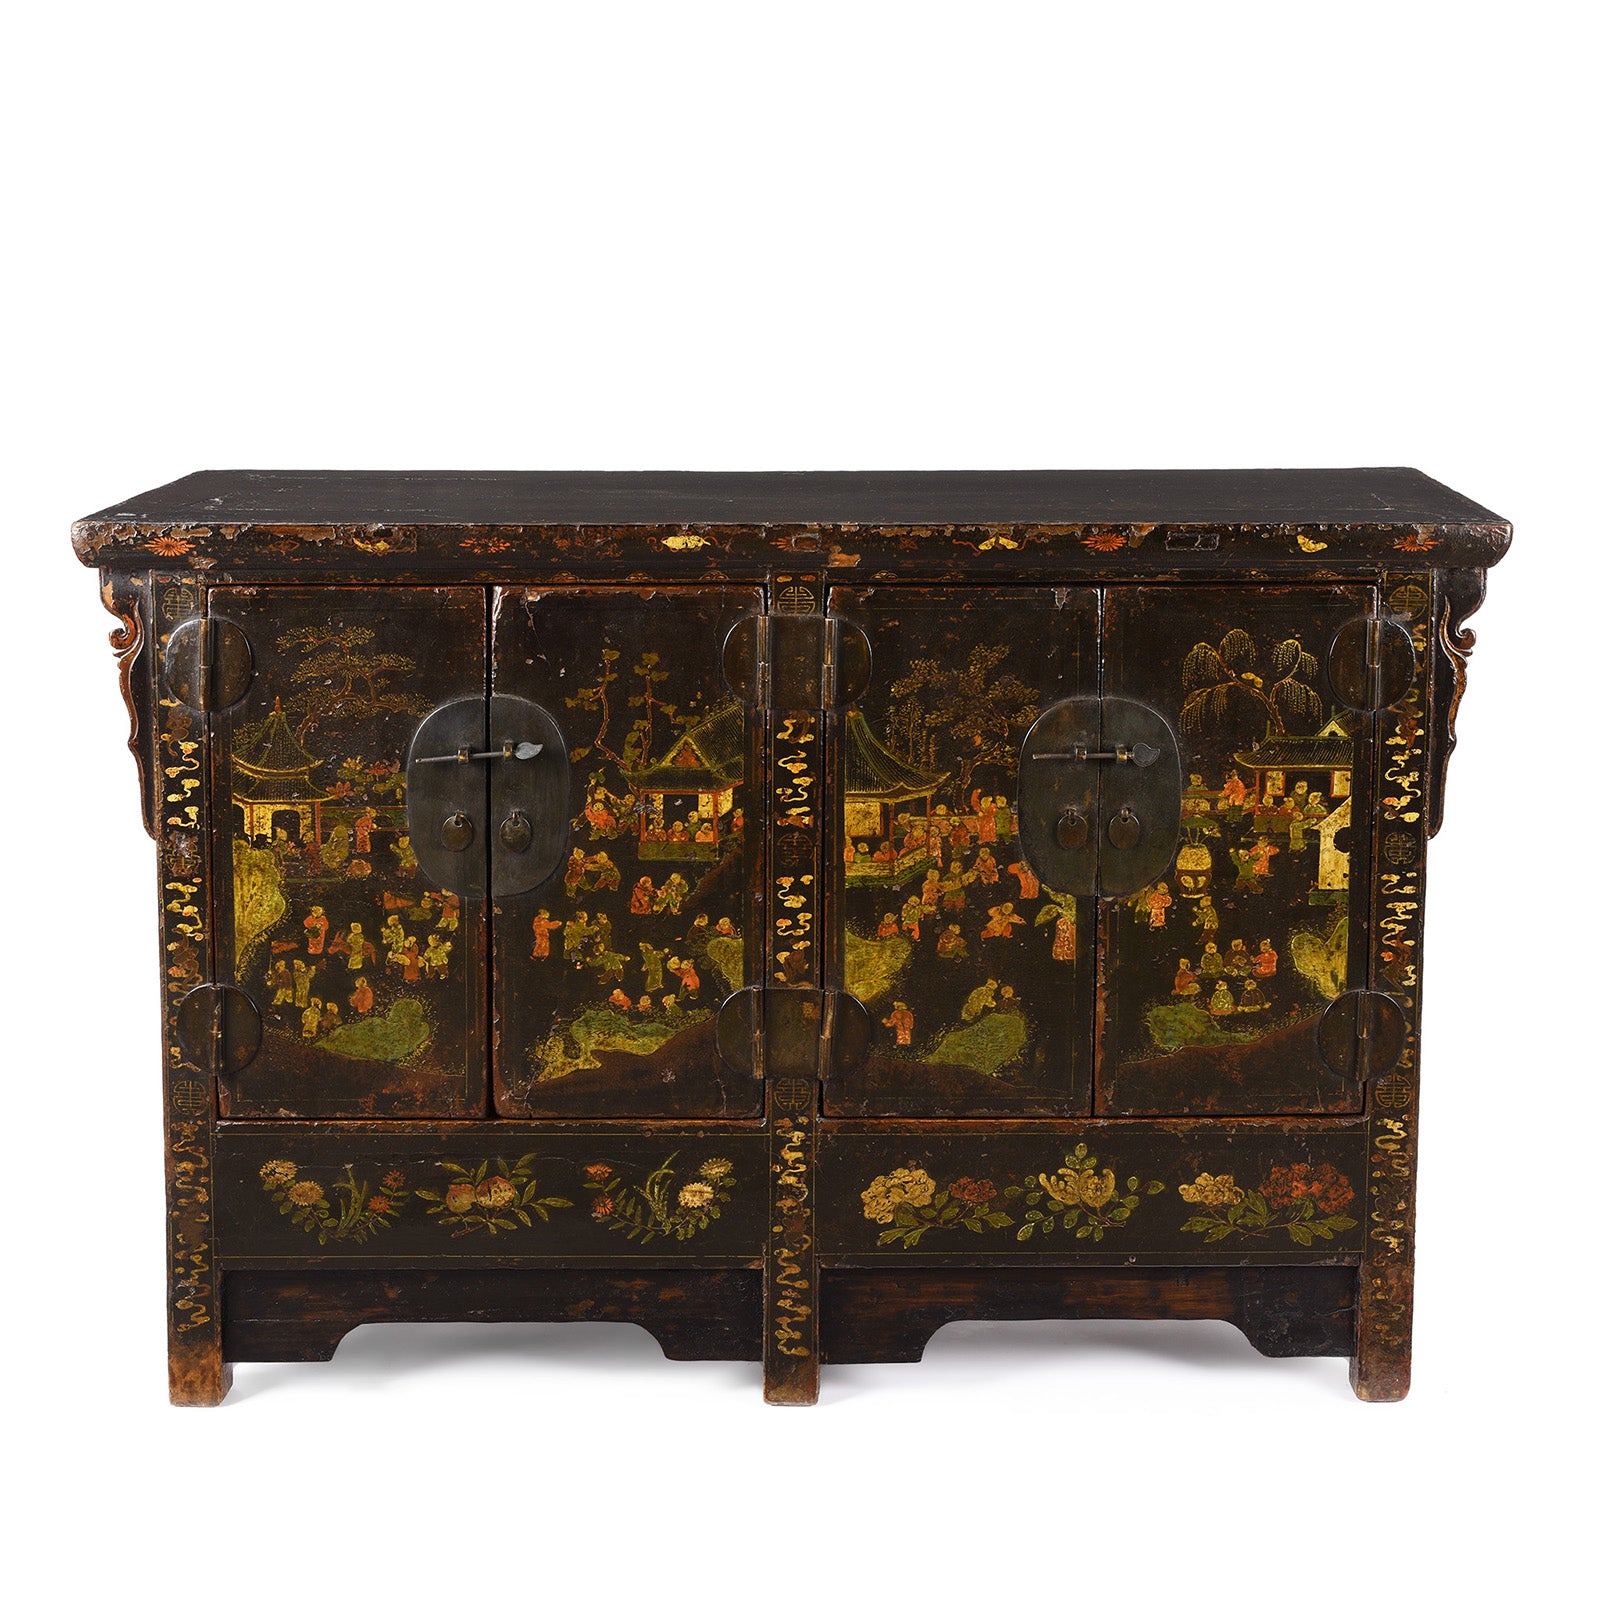 Antique Black Lacquer Sideboard From Shanxi | Indigo Antiques